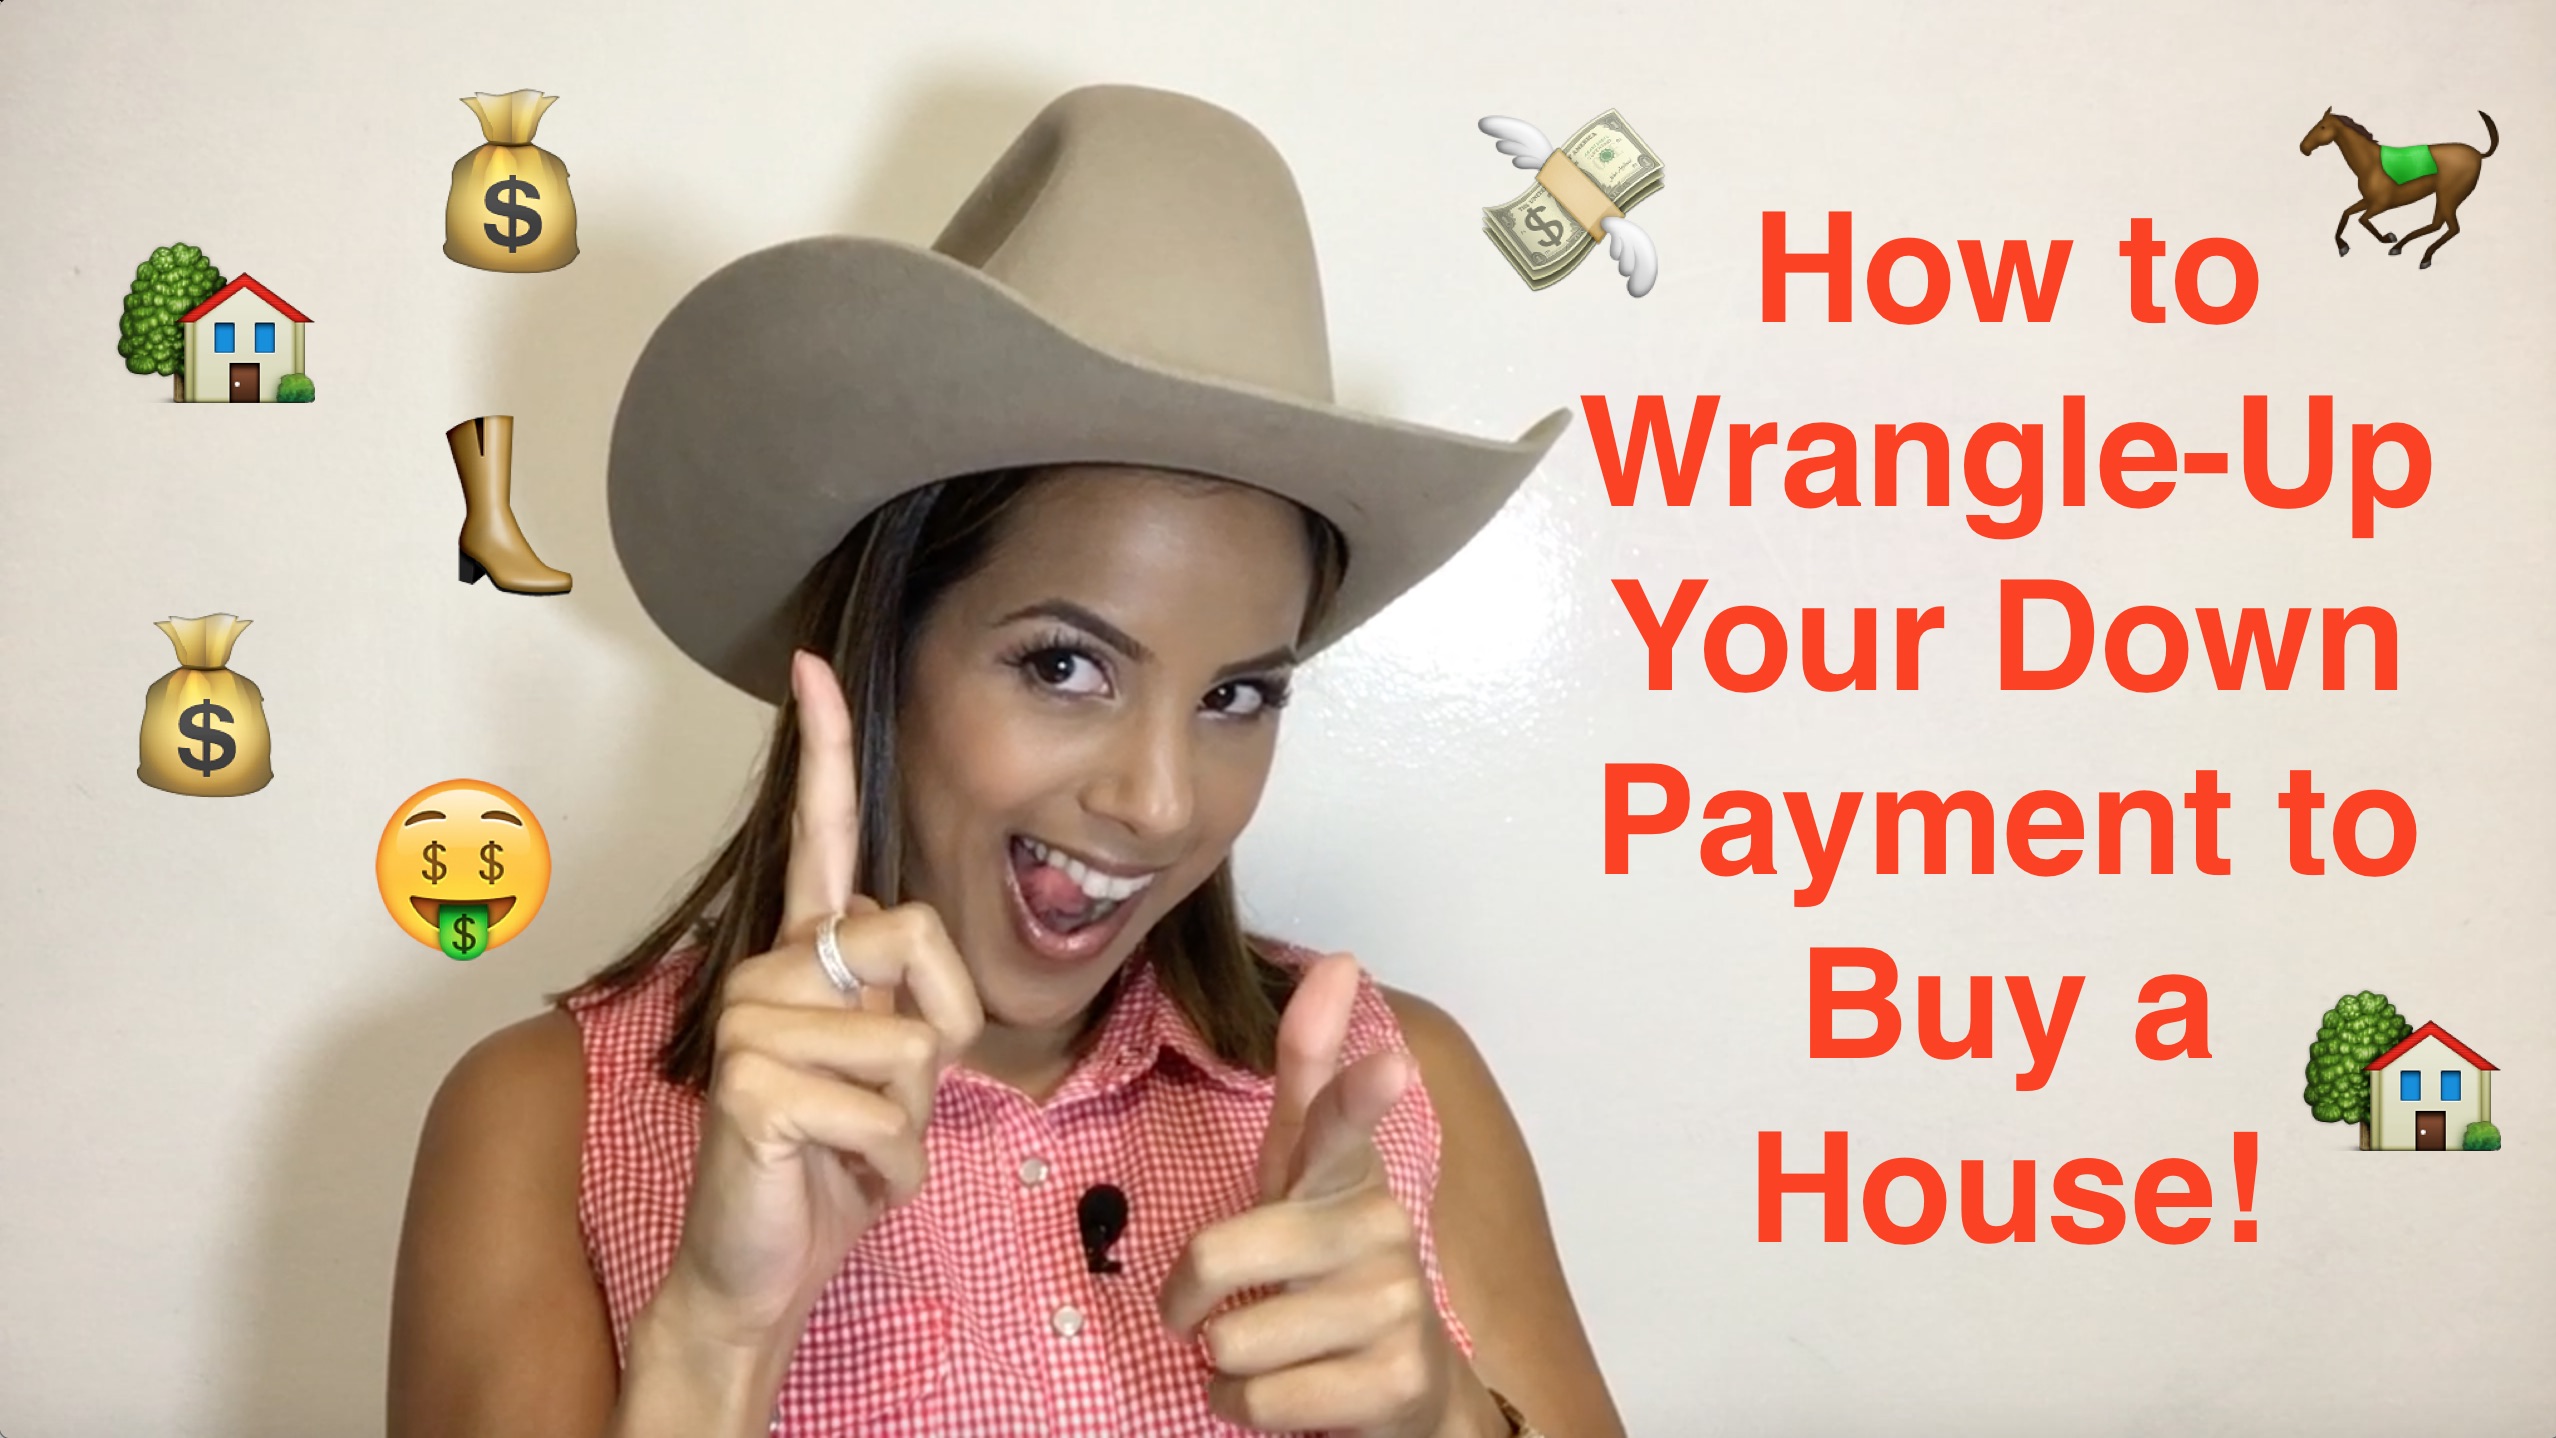 How to "wrangle-up" your down payment